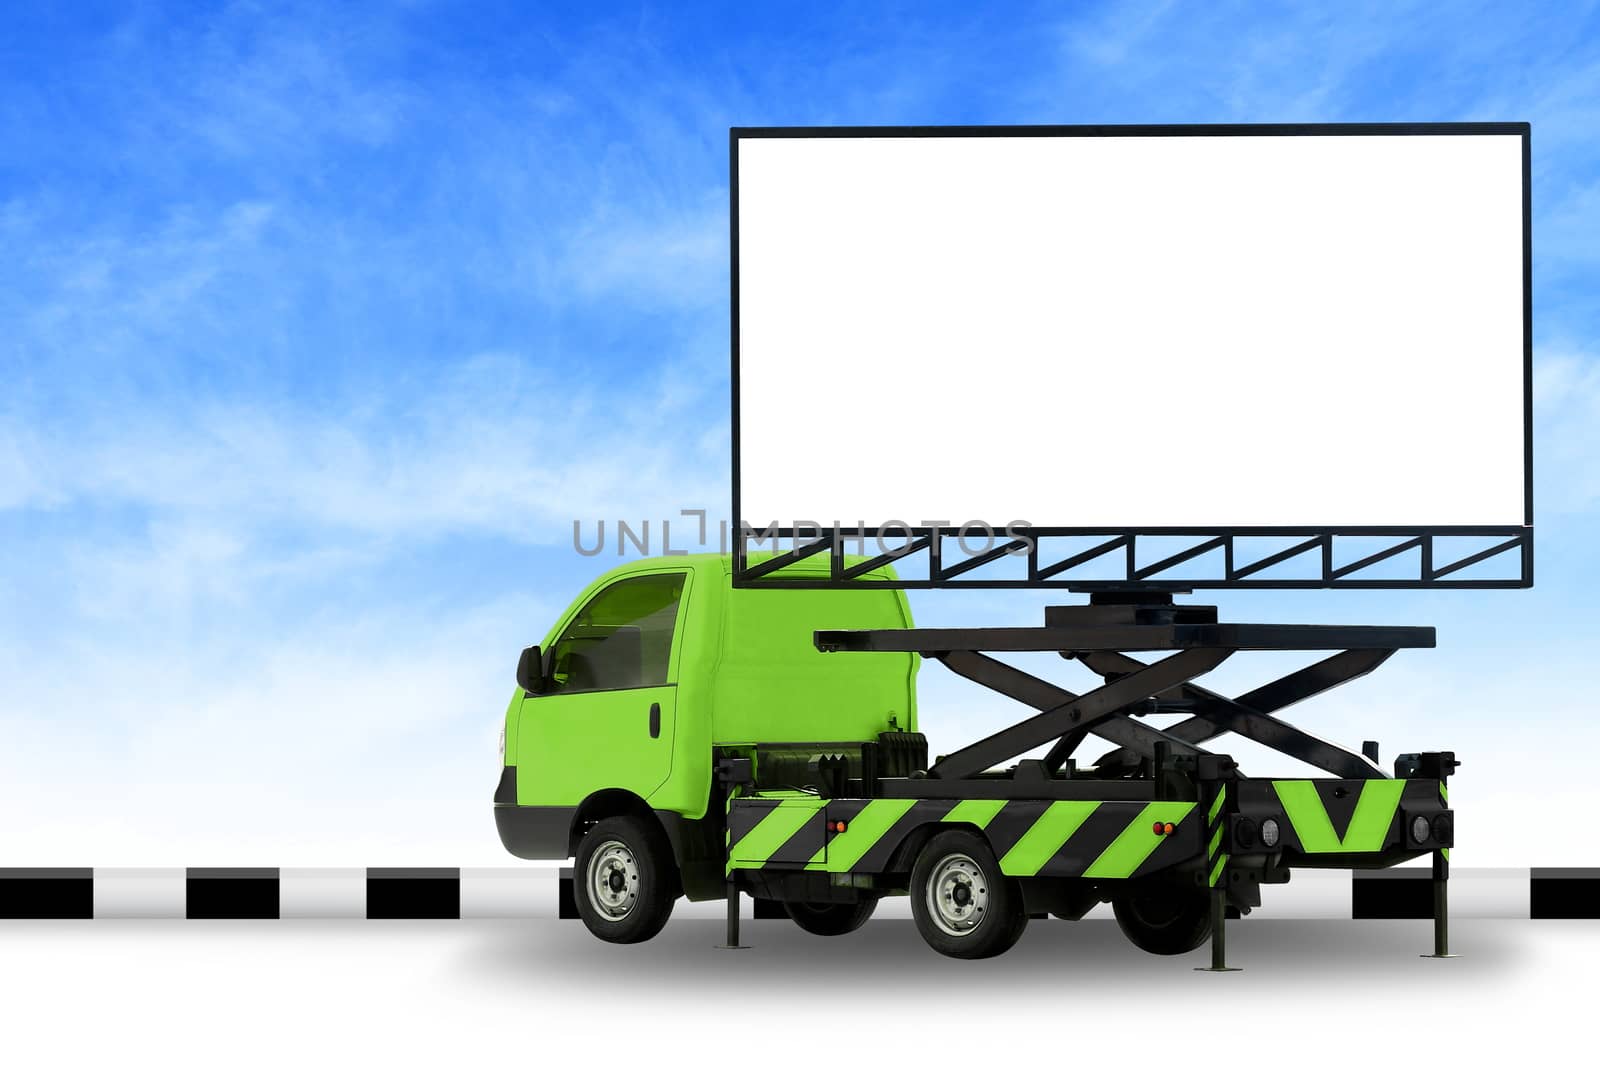 Billboard blank on car green truck LED panel for sign Advertising isolated on background sky, Large banner and billboard Roadside for an advertisement large by cgdeaw